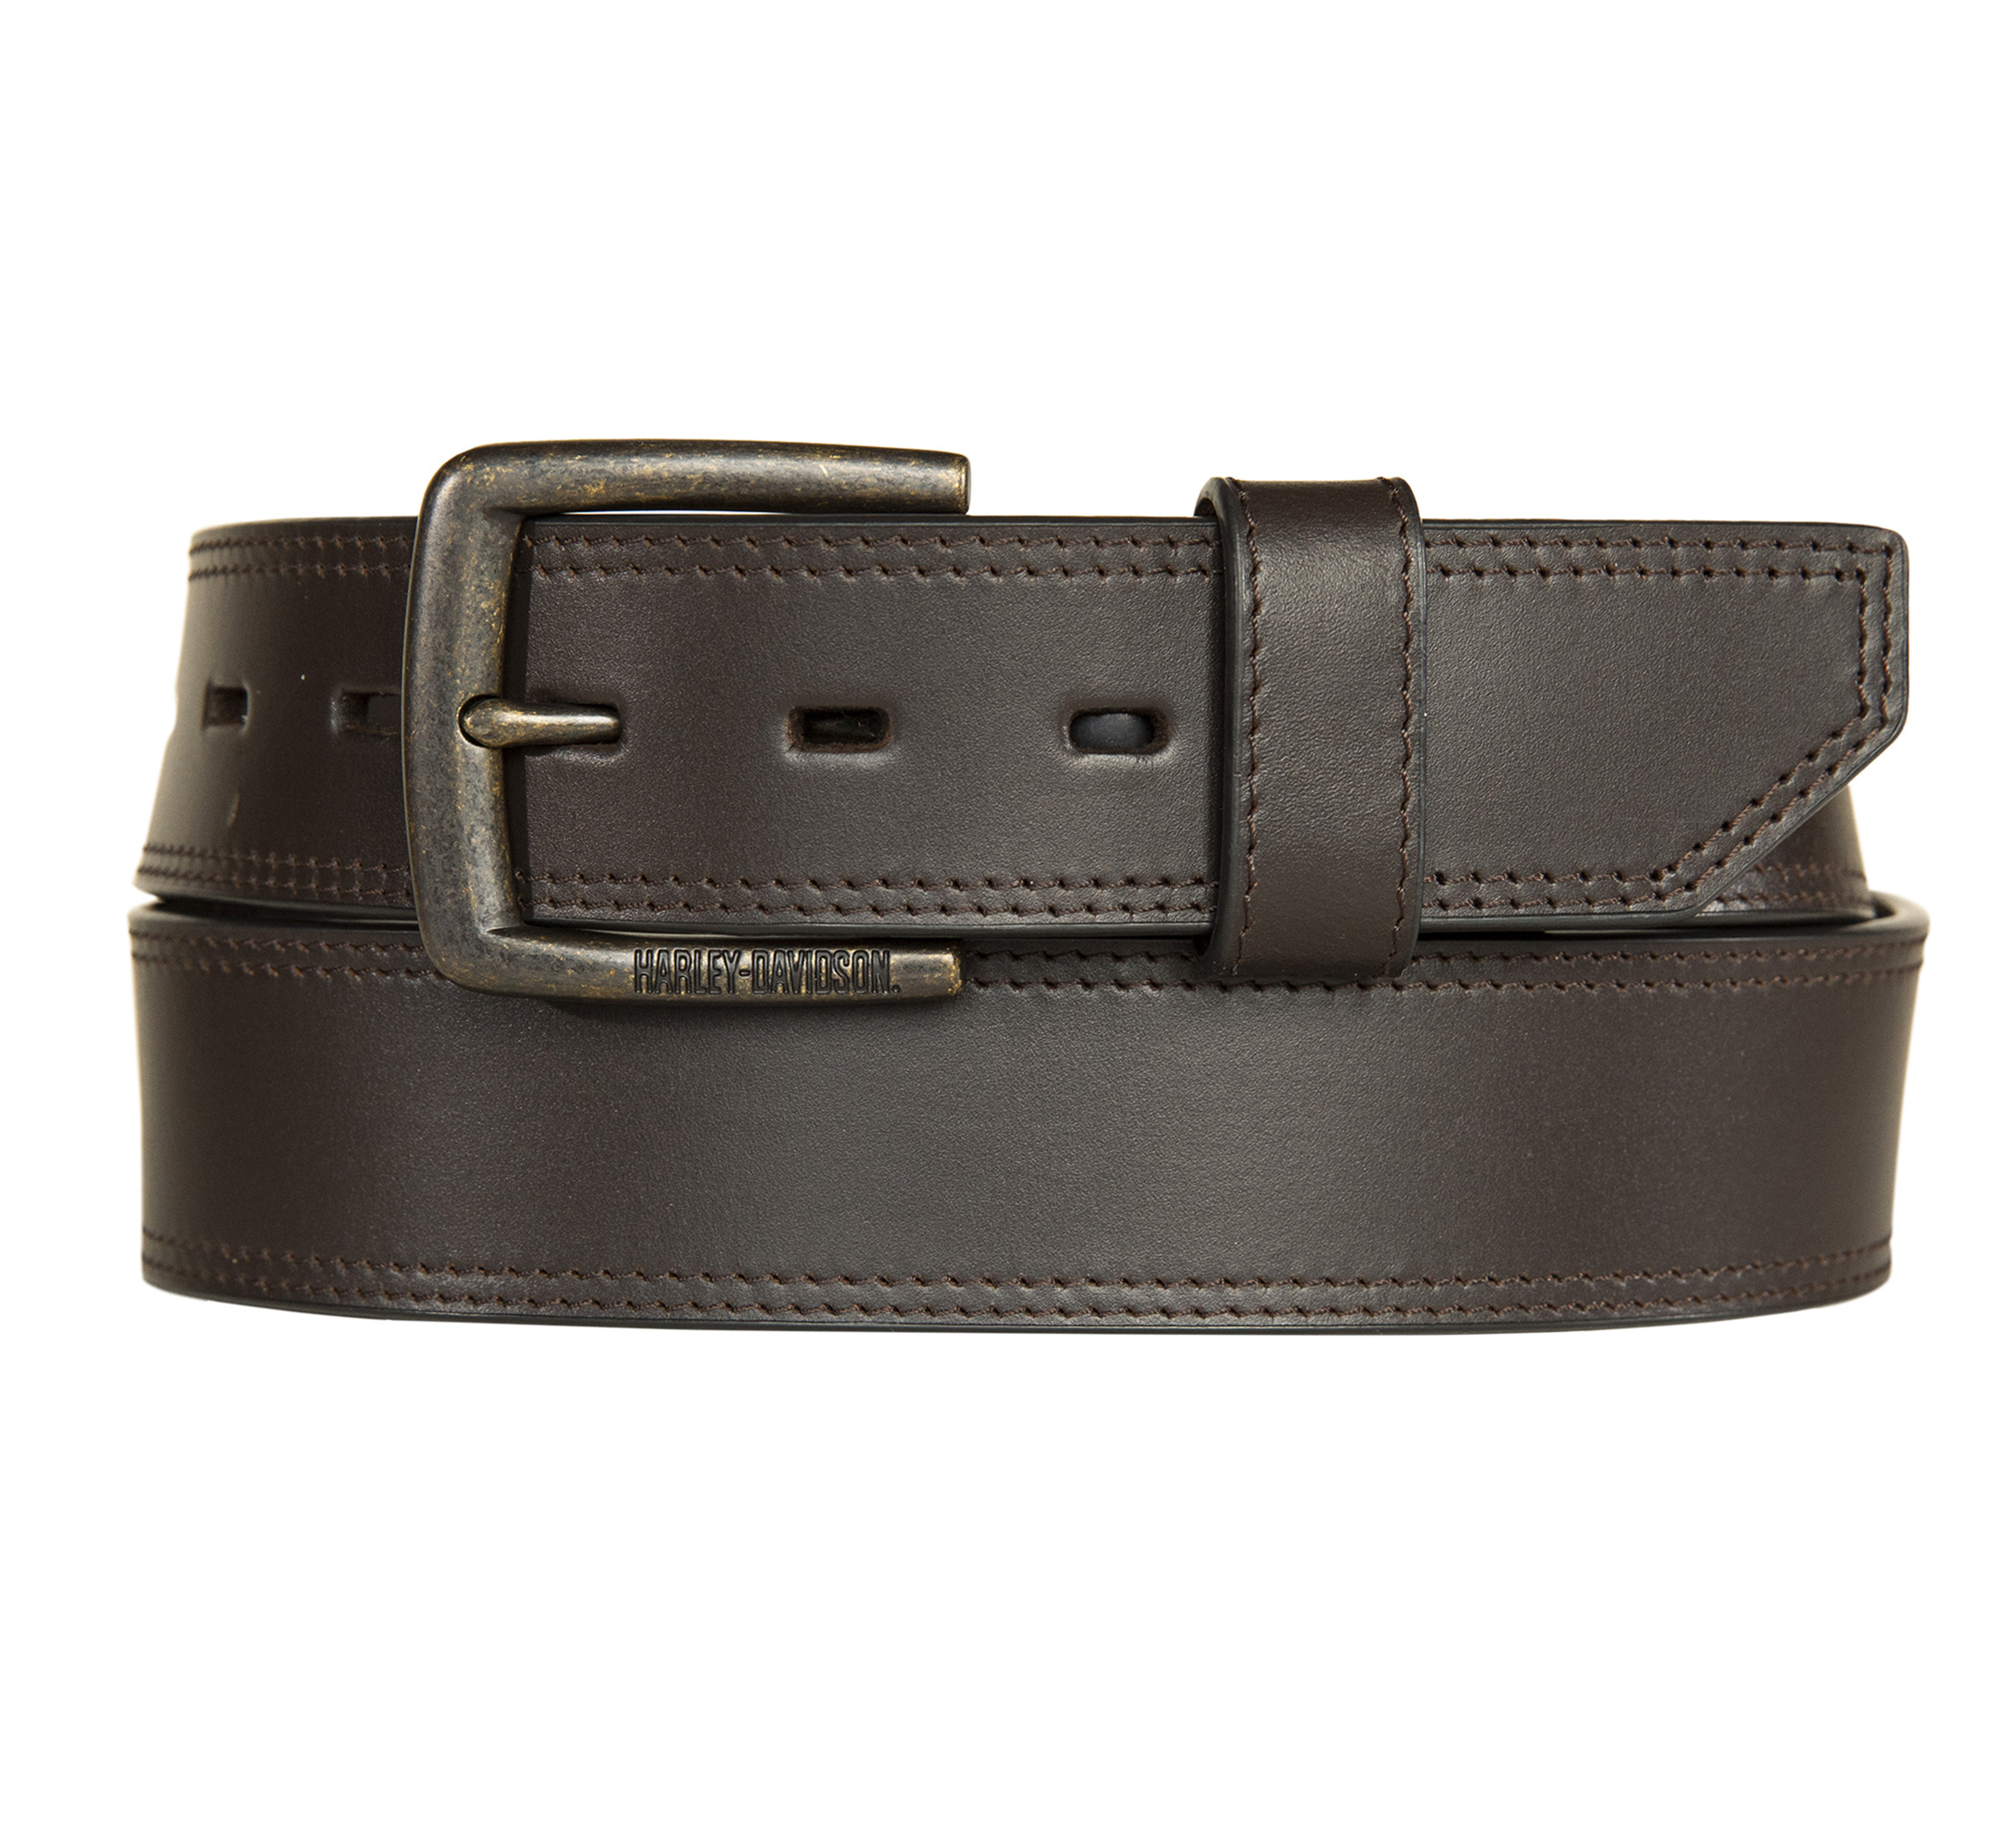 On the Road belt buckle & Reversible leather strap 38 mm